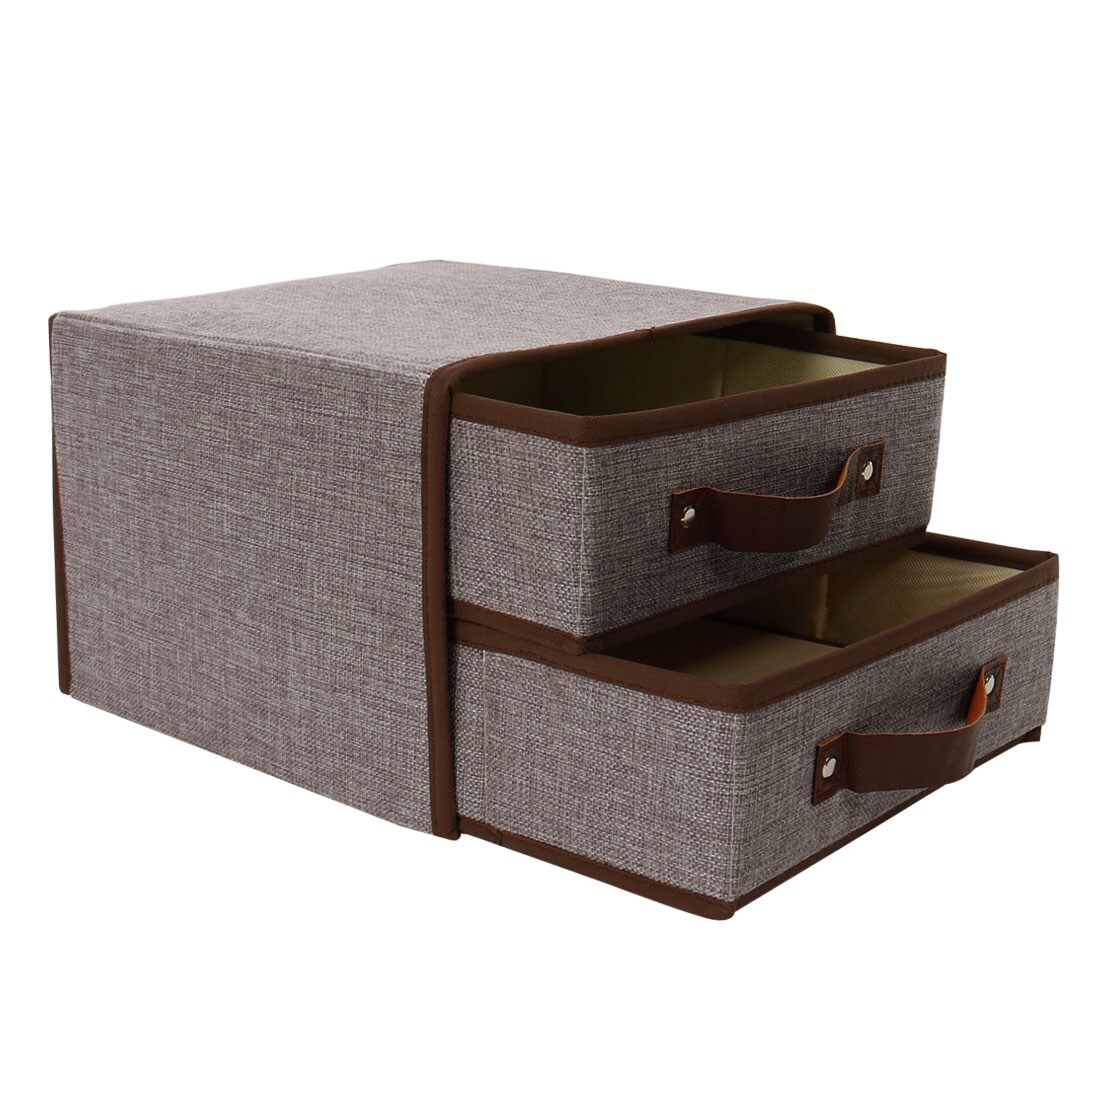 PRANDOM Large Foldable Cube Storage Bins 11x11 inch Fabric Linen Storage Baskets Cubes Drawer with Cotton Handles Organizer for Shelves Toy Nursery Closet Bedroom Purple 2-Pack 